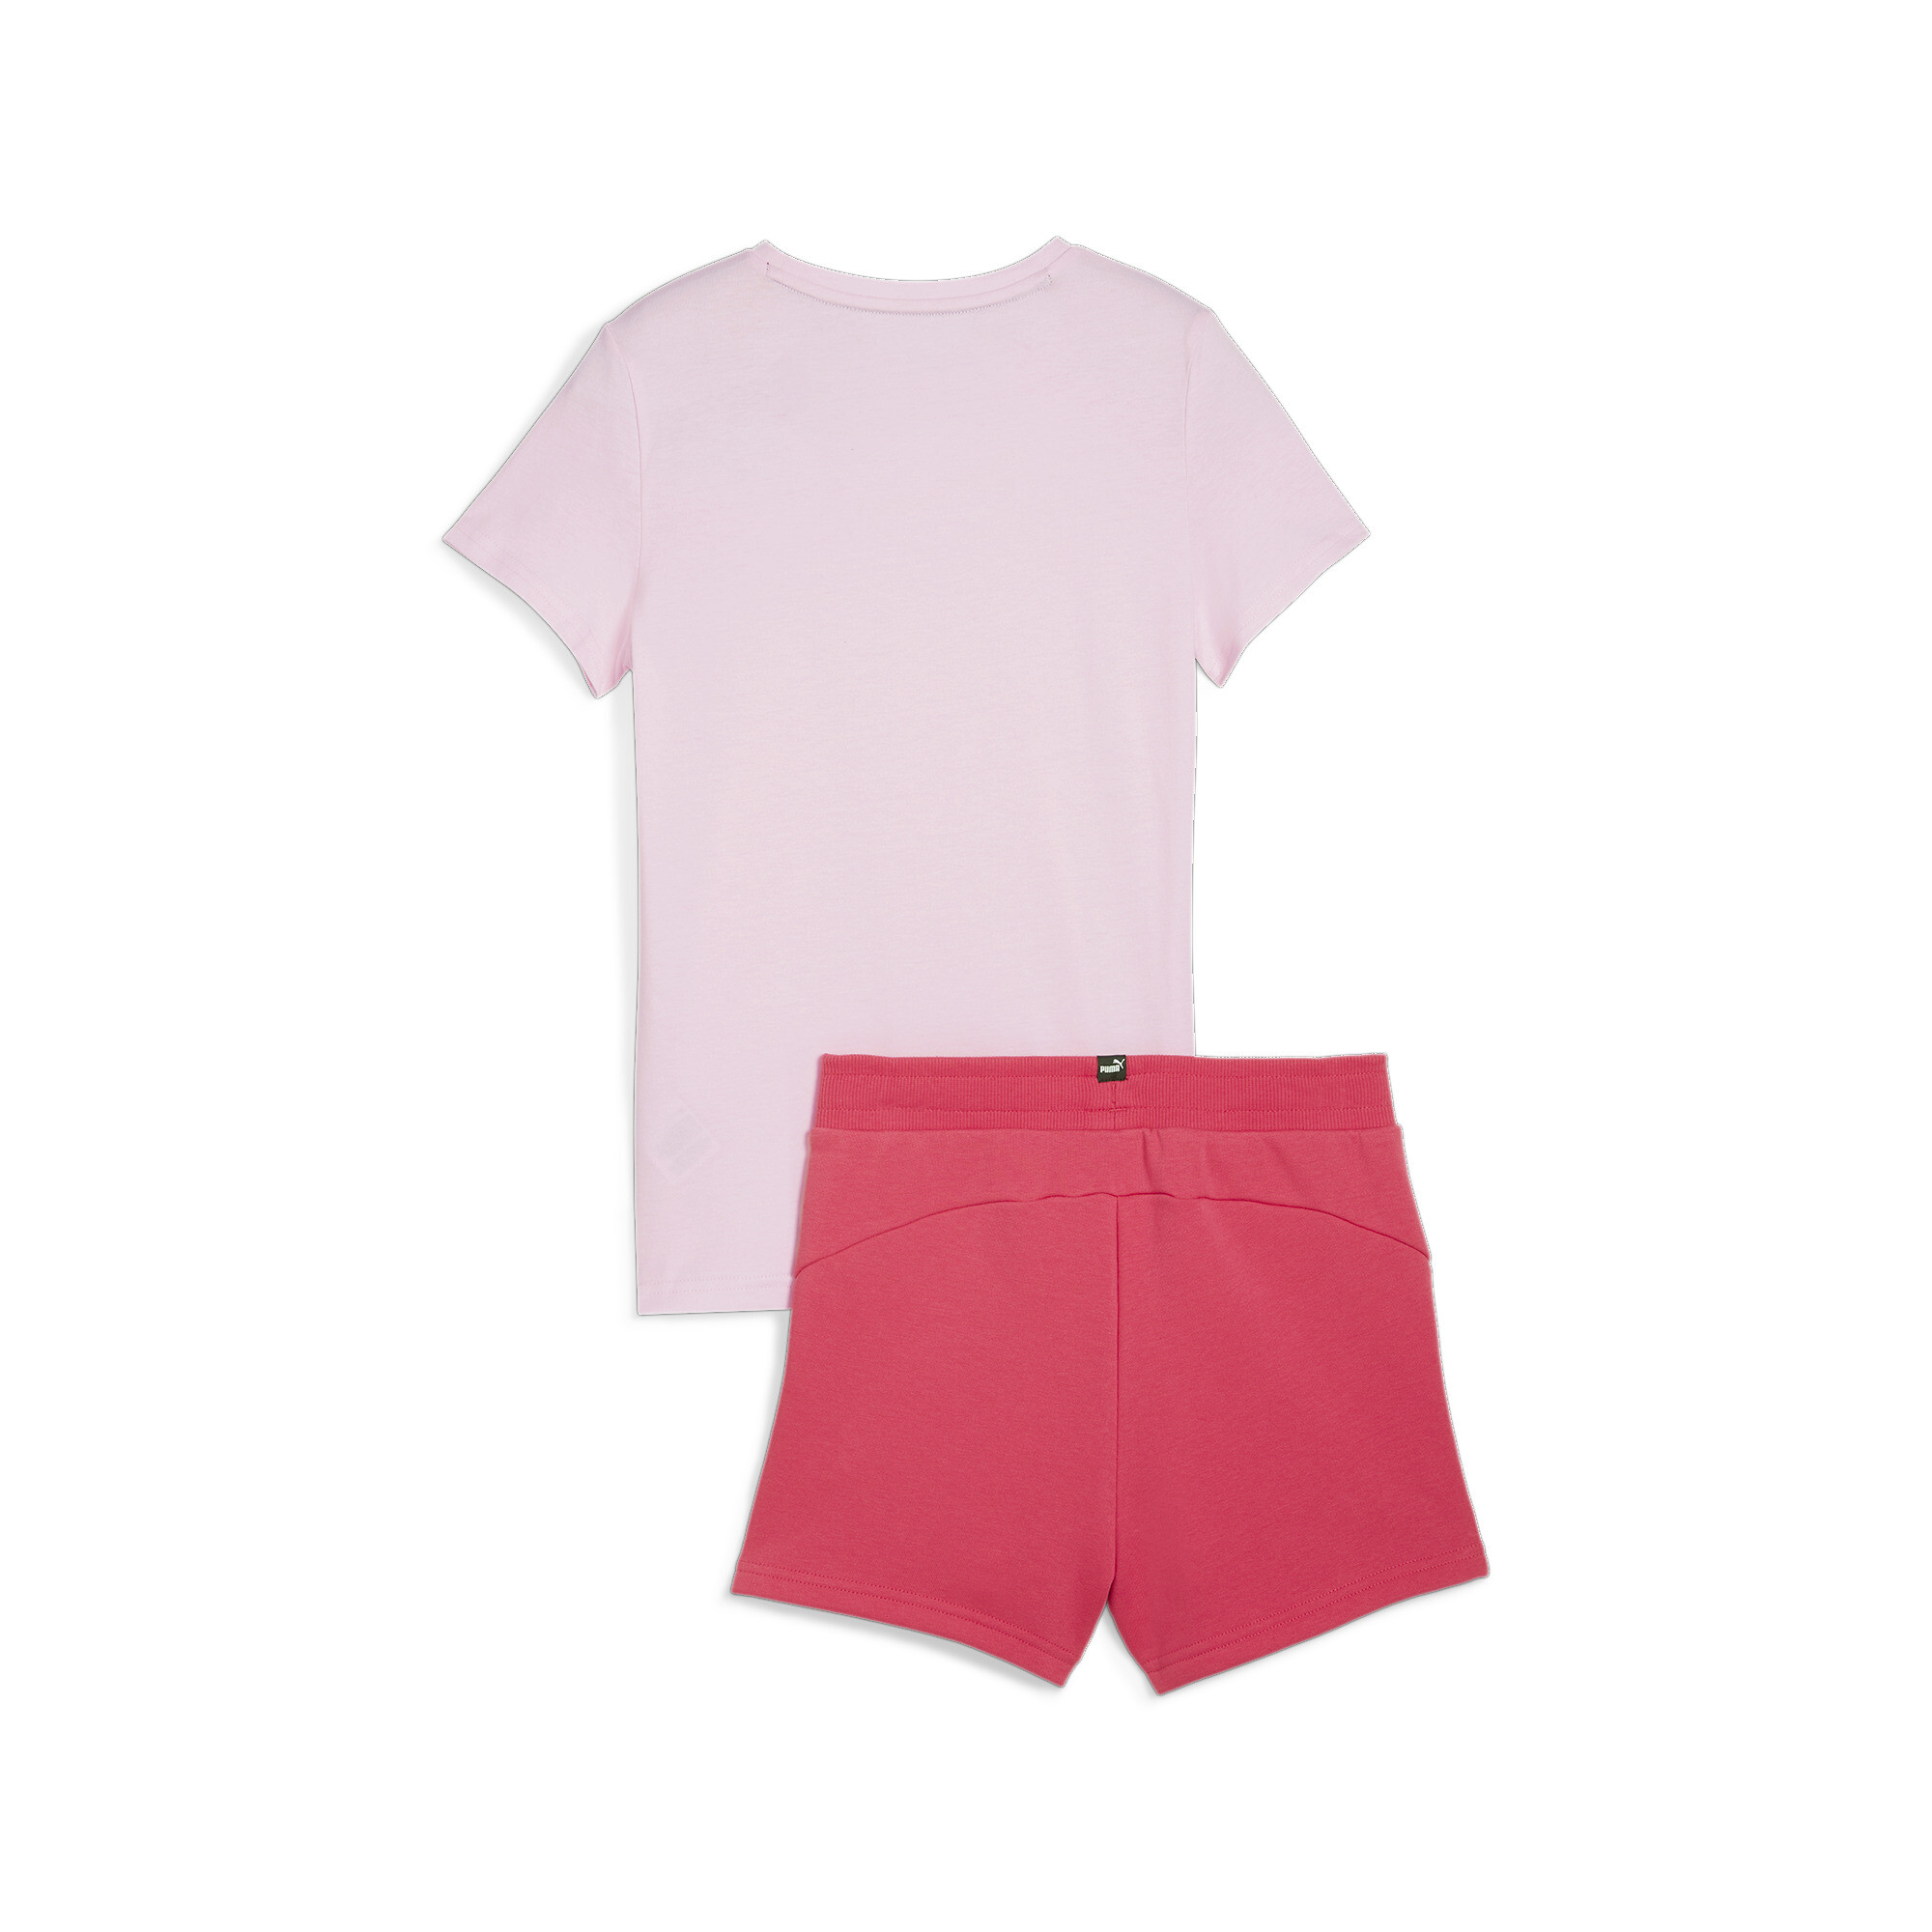 Women's Puma Logo Tee And Shorts Youth Set, Pink, Size 13-14Y, Clothing